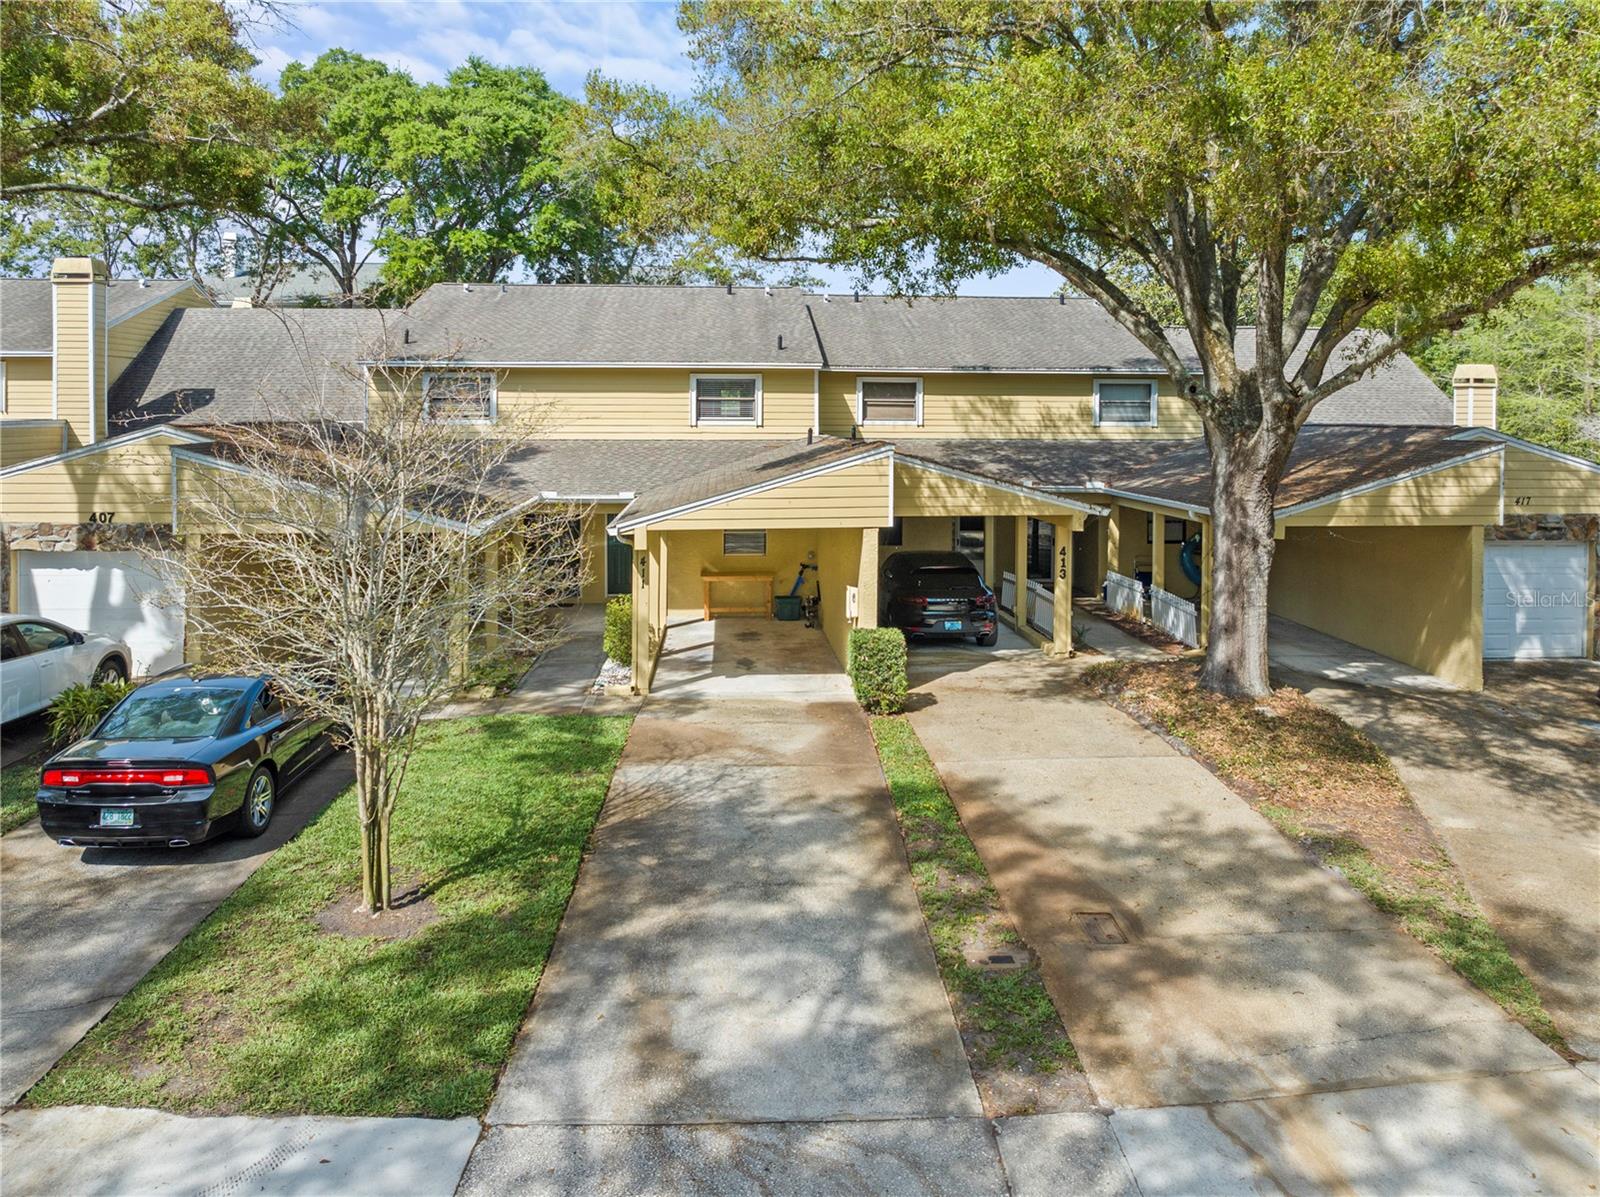 View PALM HARBOR, FL 34684 townhome